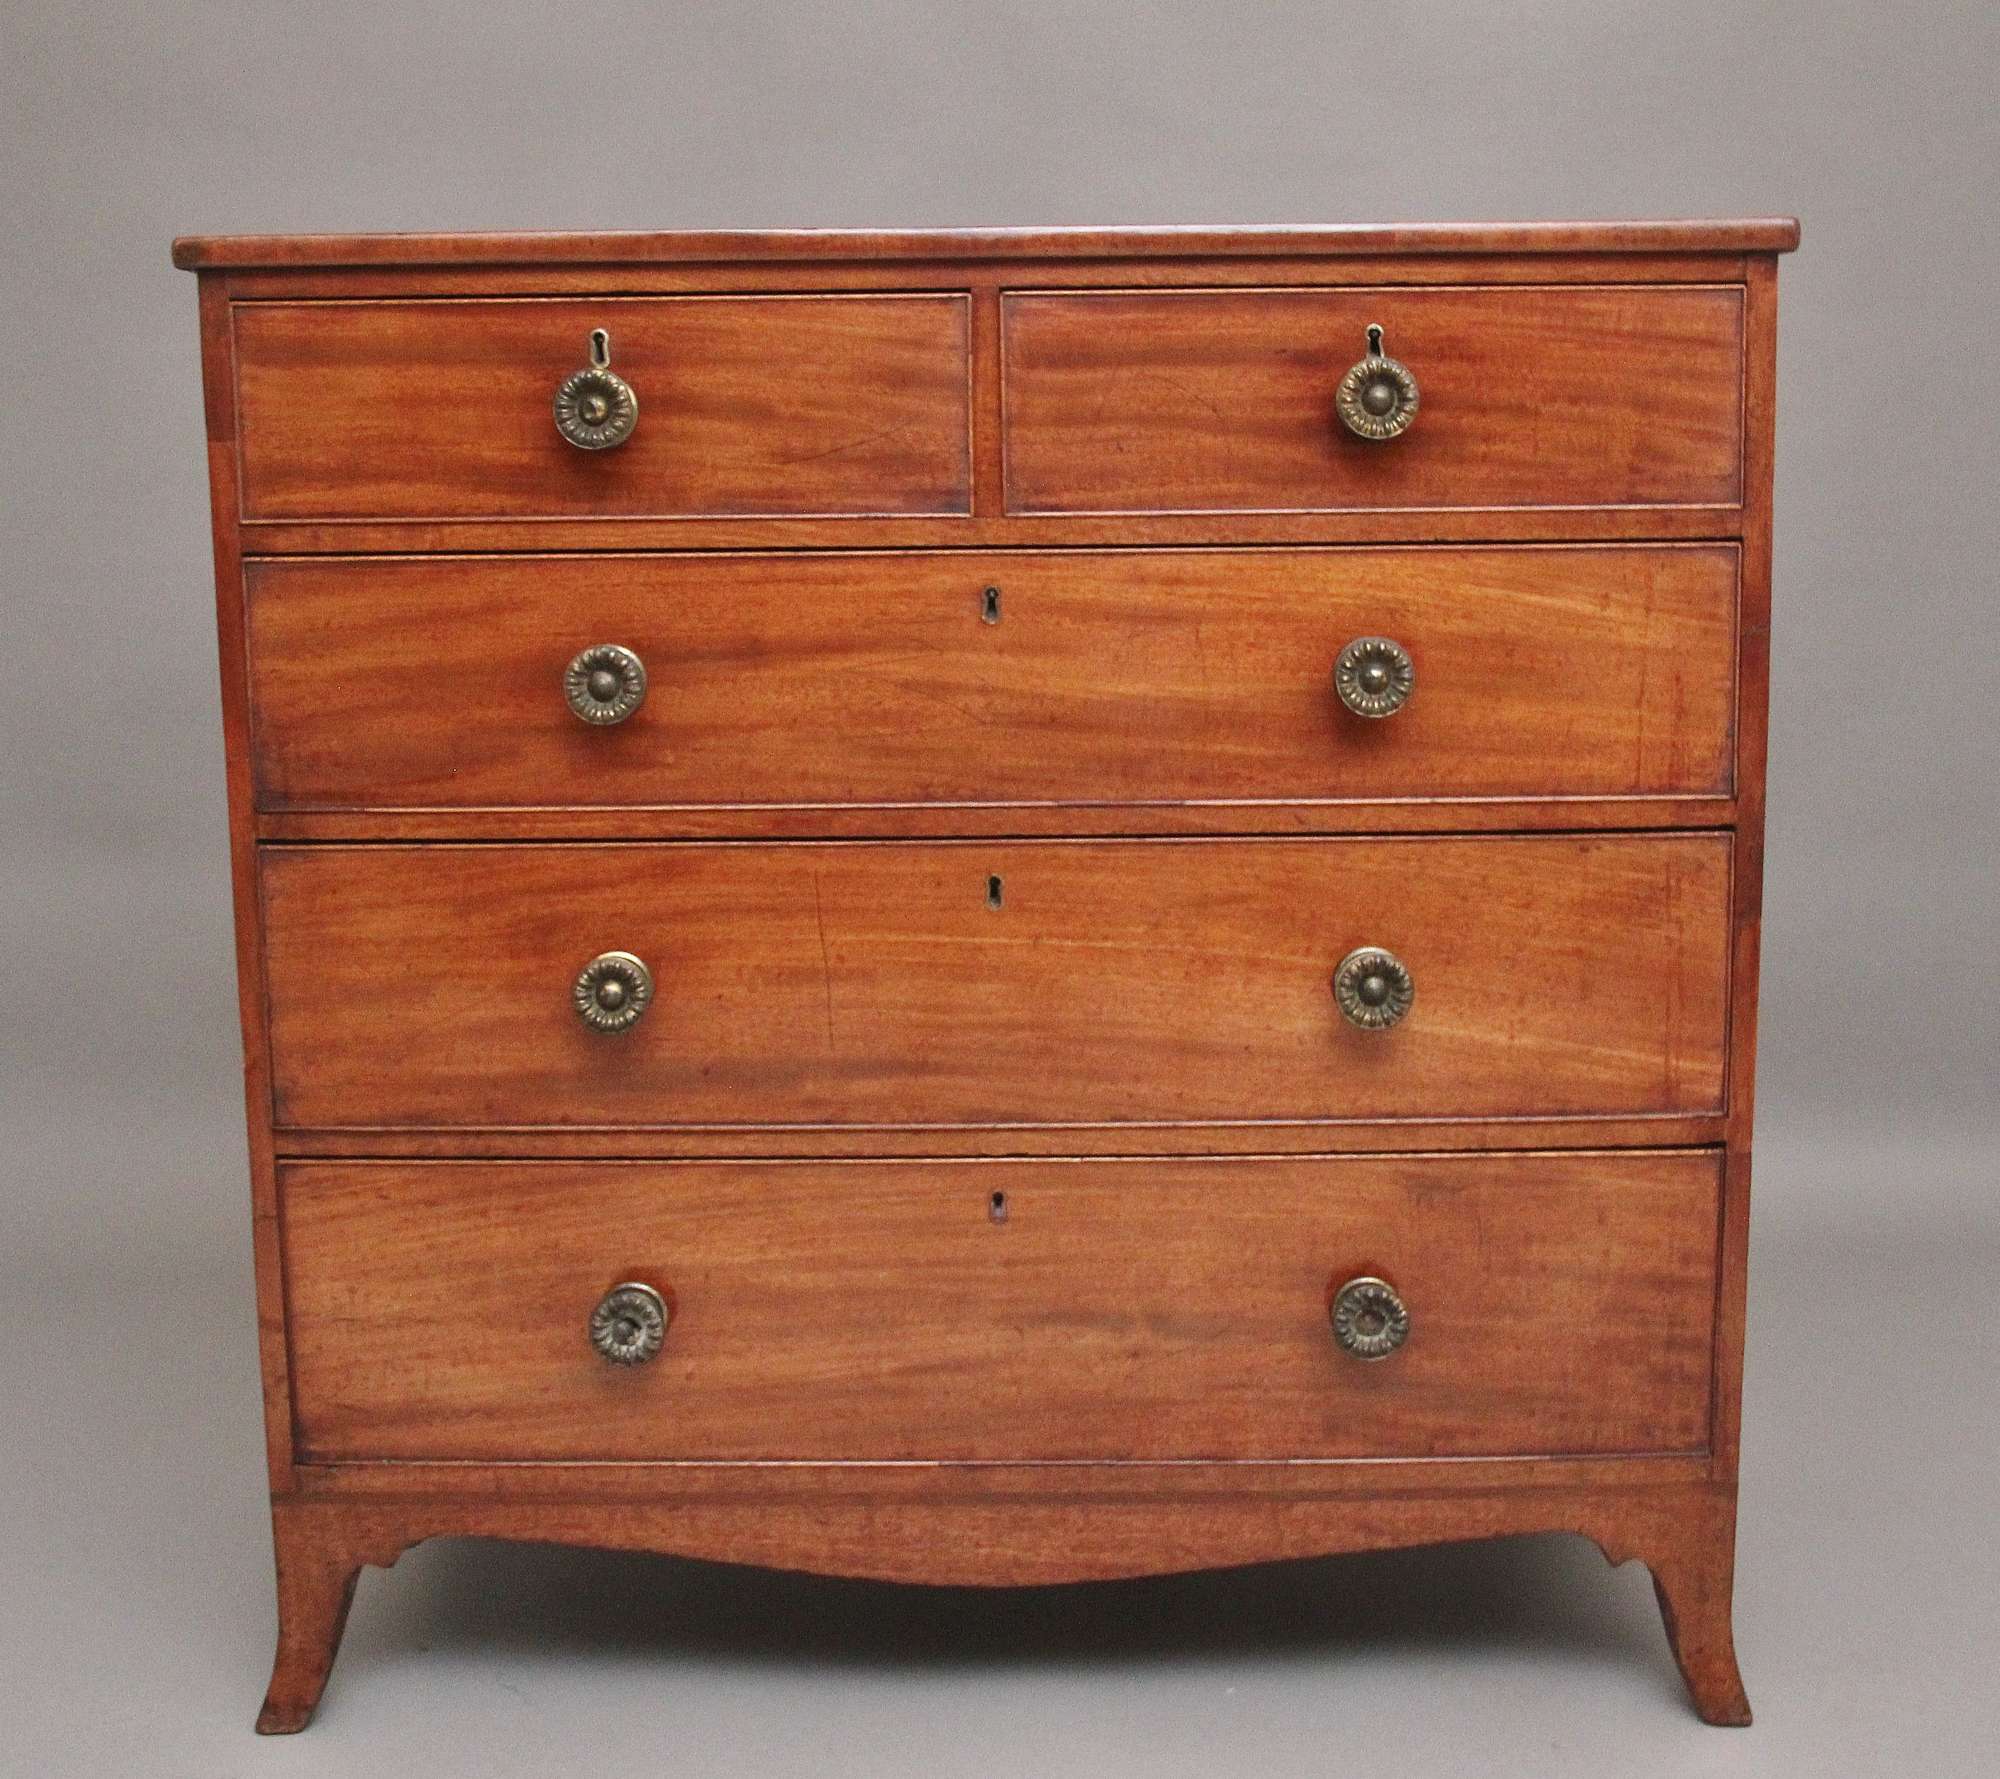 Early 19th Century mahogany chest of drawers